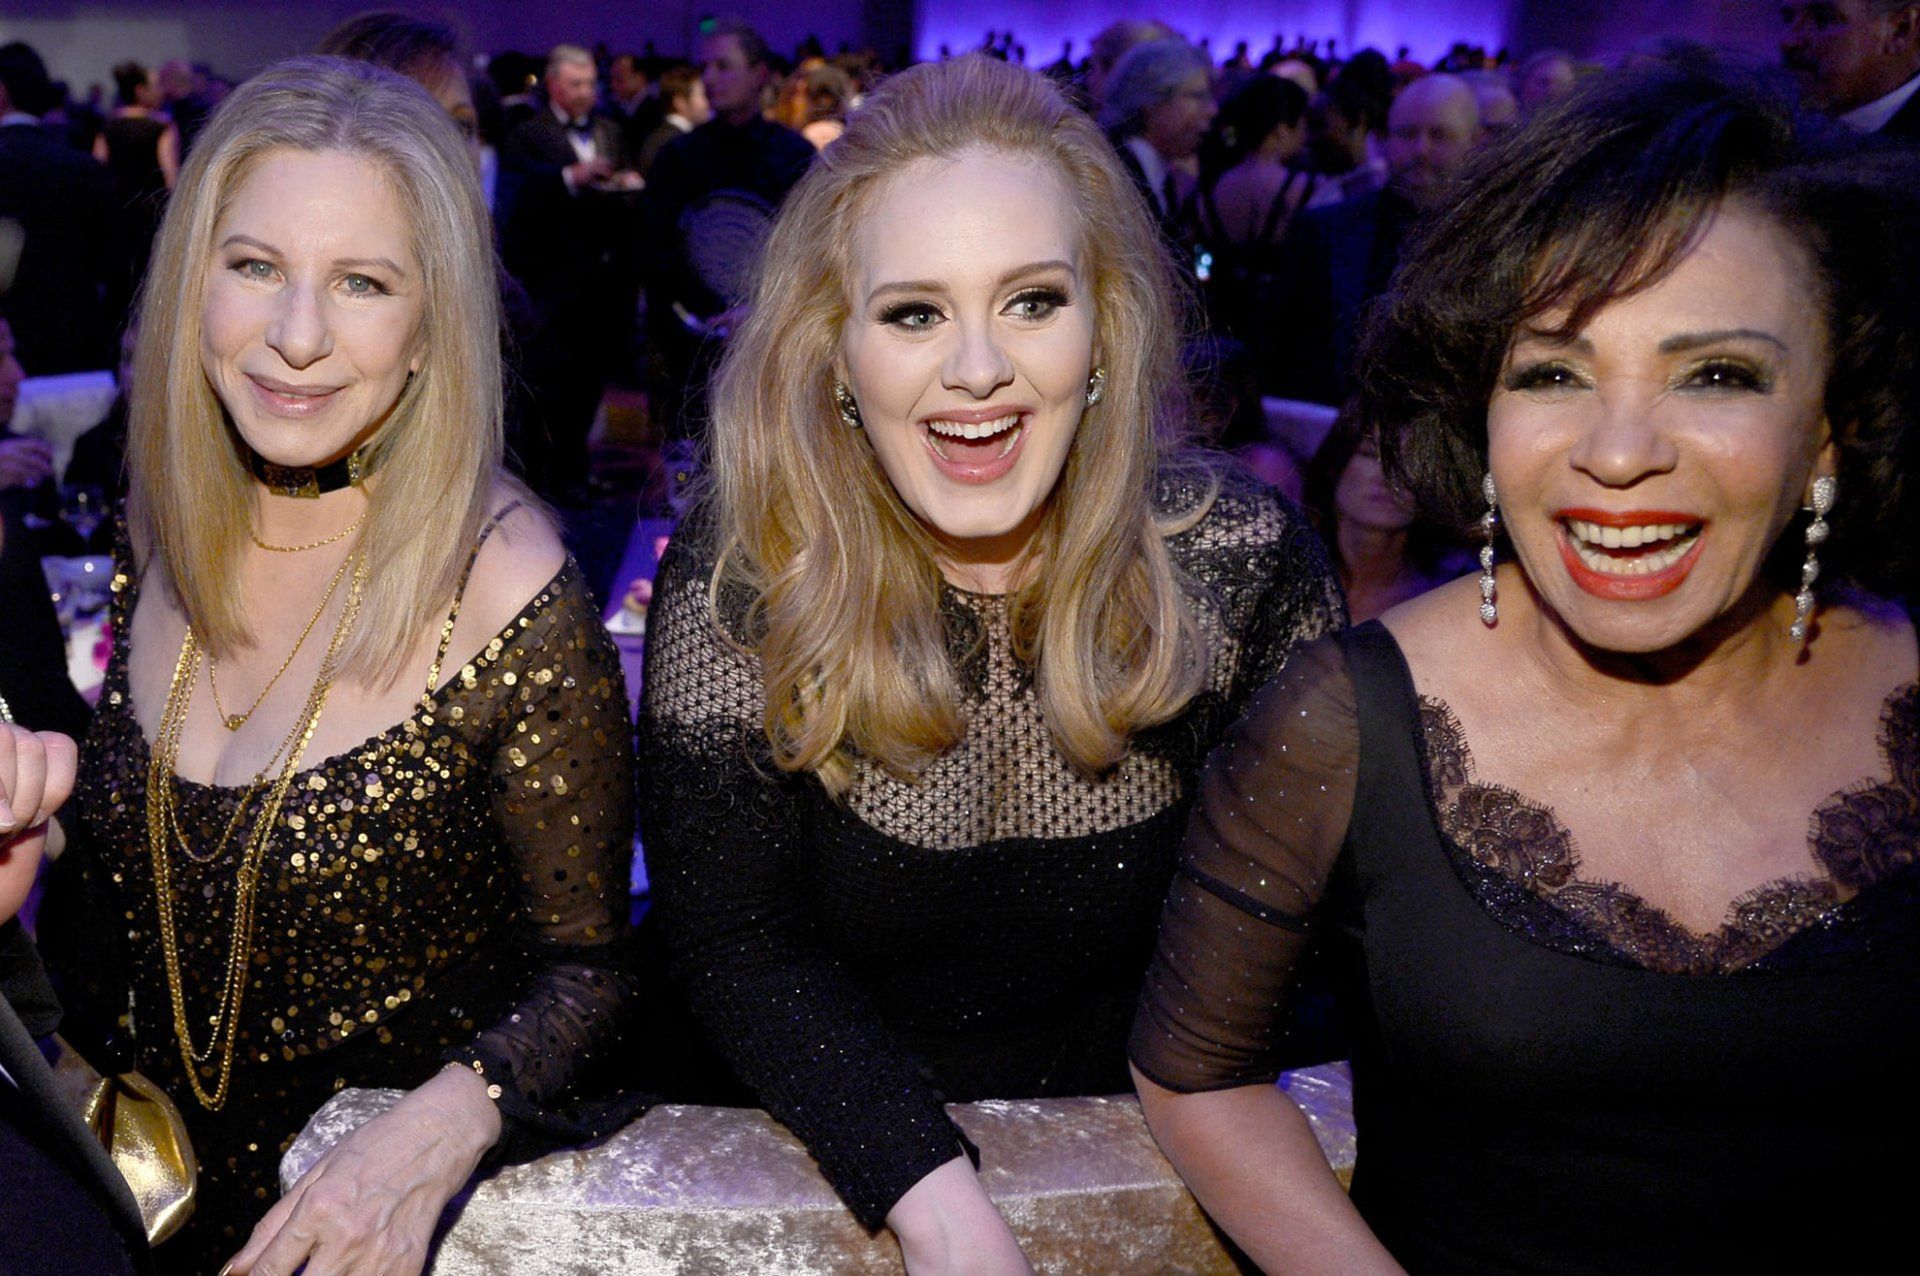 Streisand, Adele, and Shirley Bassey smile for the photographer at the 2013 Academy Awards.